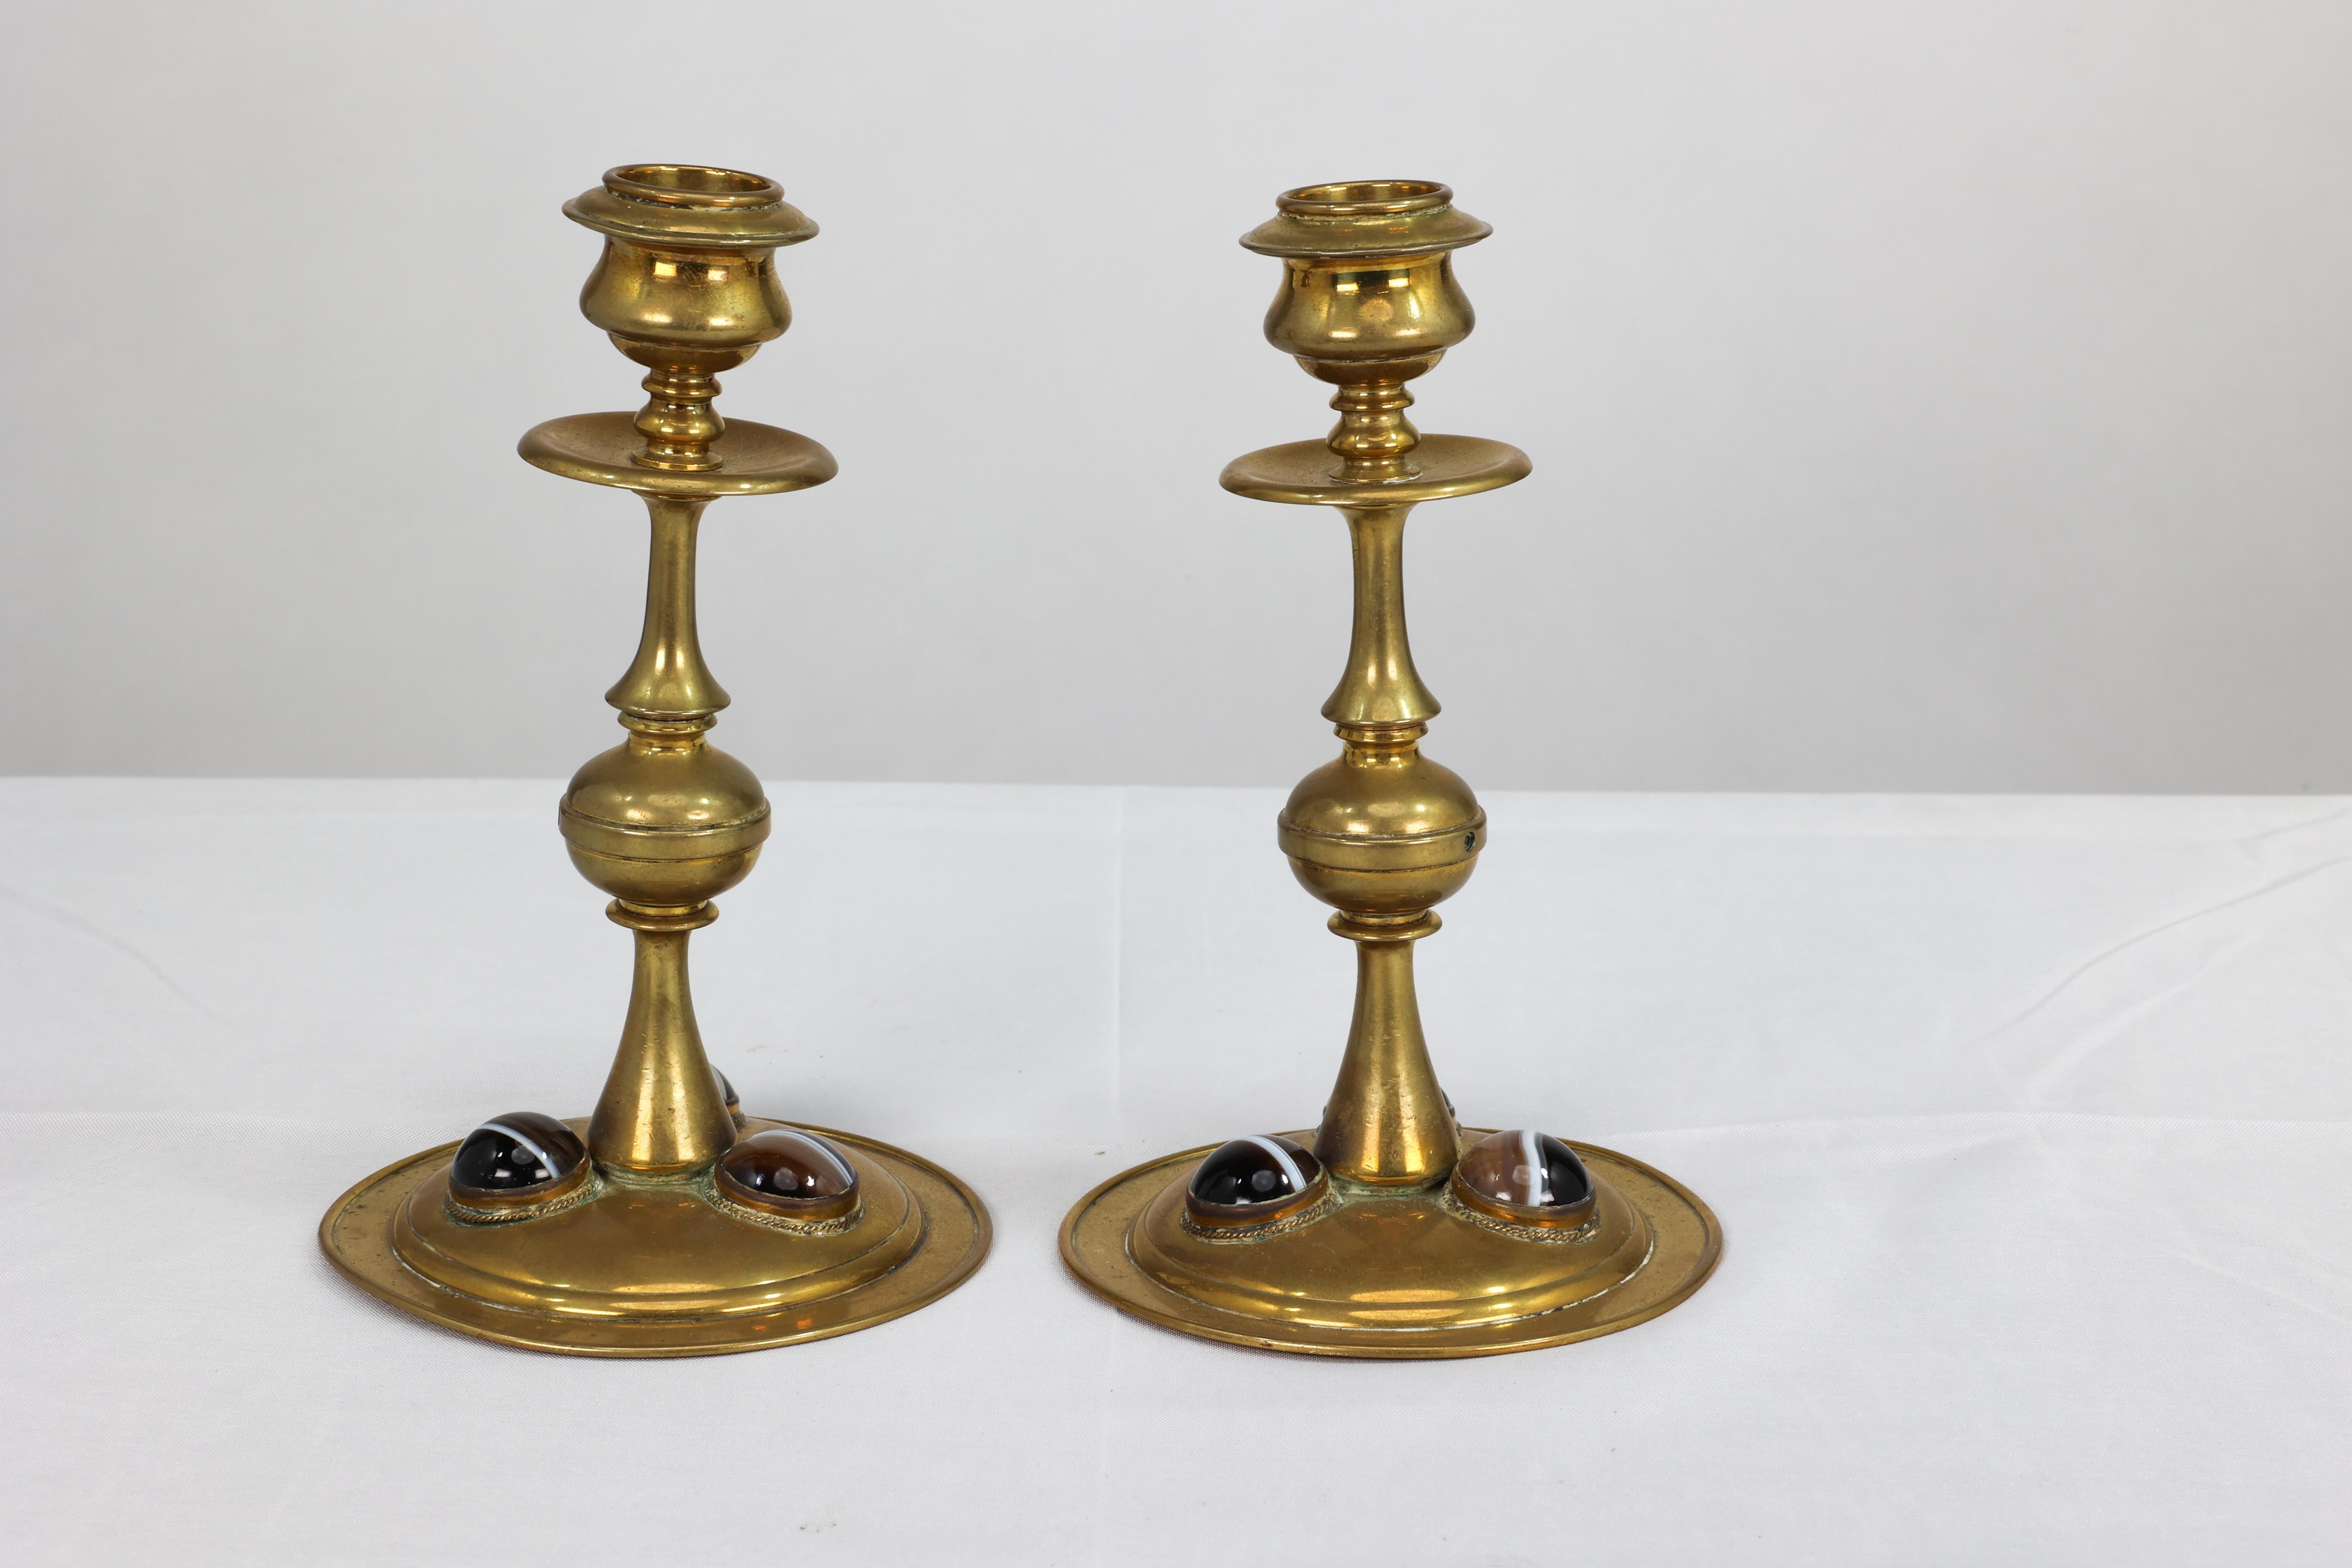 A Gothic Revival brass desk set with a pair of brass candlesticks and a matching pen tray all inset with multi-coloured semi-precious glass bulls eyes. Tray H 2.5 cm x W 22 cm x D 7.5 cm.